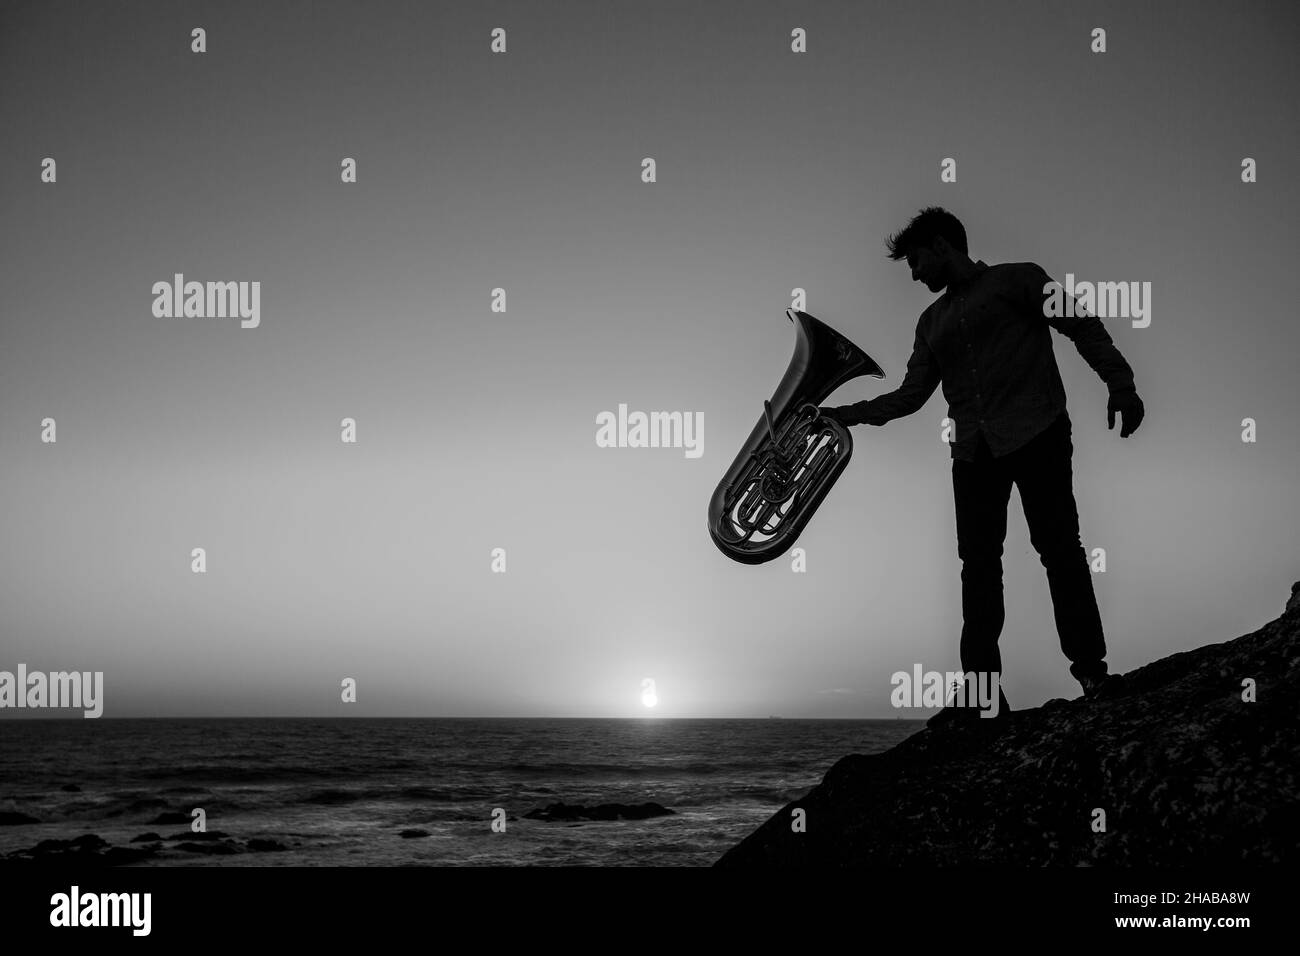 Silhouette of a man with a trumpet by the ocean. Black and white photo. Stock Photo